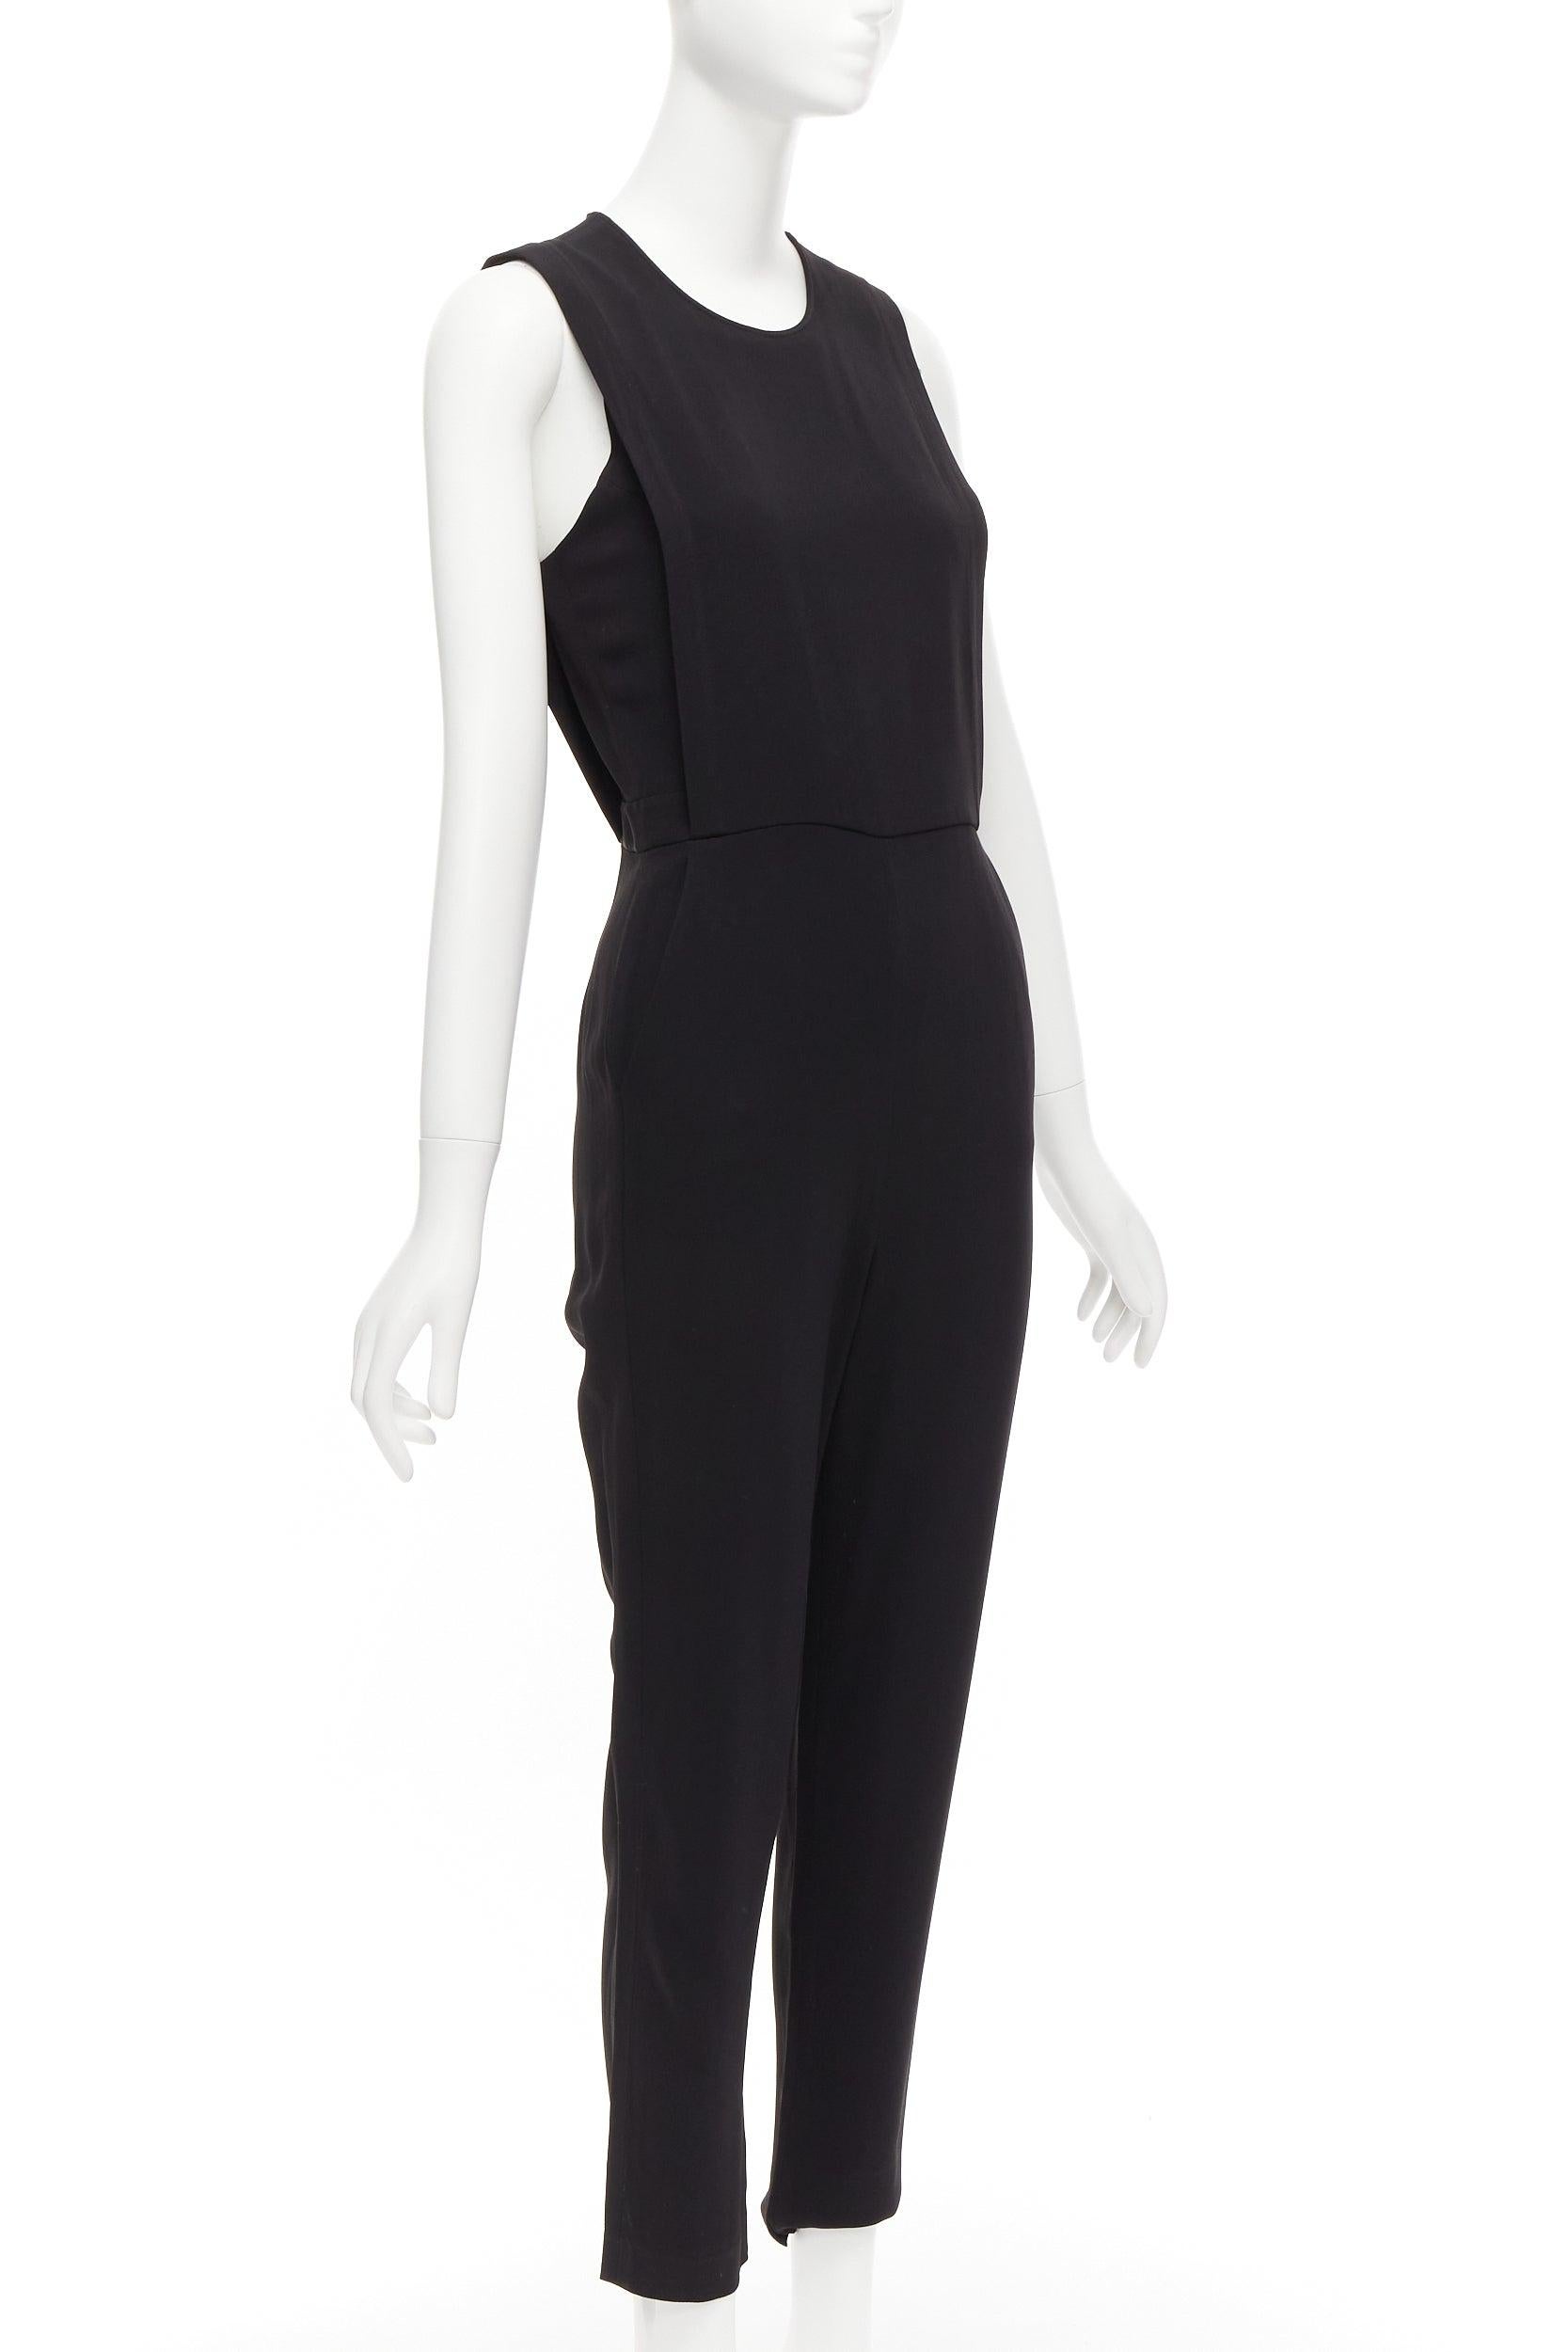 THEORY black layered top back zip cropped sleeveless jumpsuit US0 XS
Reference: CELG/A00373
Brand: Theory
Material: Viscose, Blend
Color: Black
Pattern: Solid
Closure: Zip
Lining: Black Fabric
Extra Details: Zip and hook and eye closure at